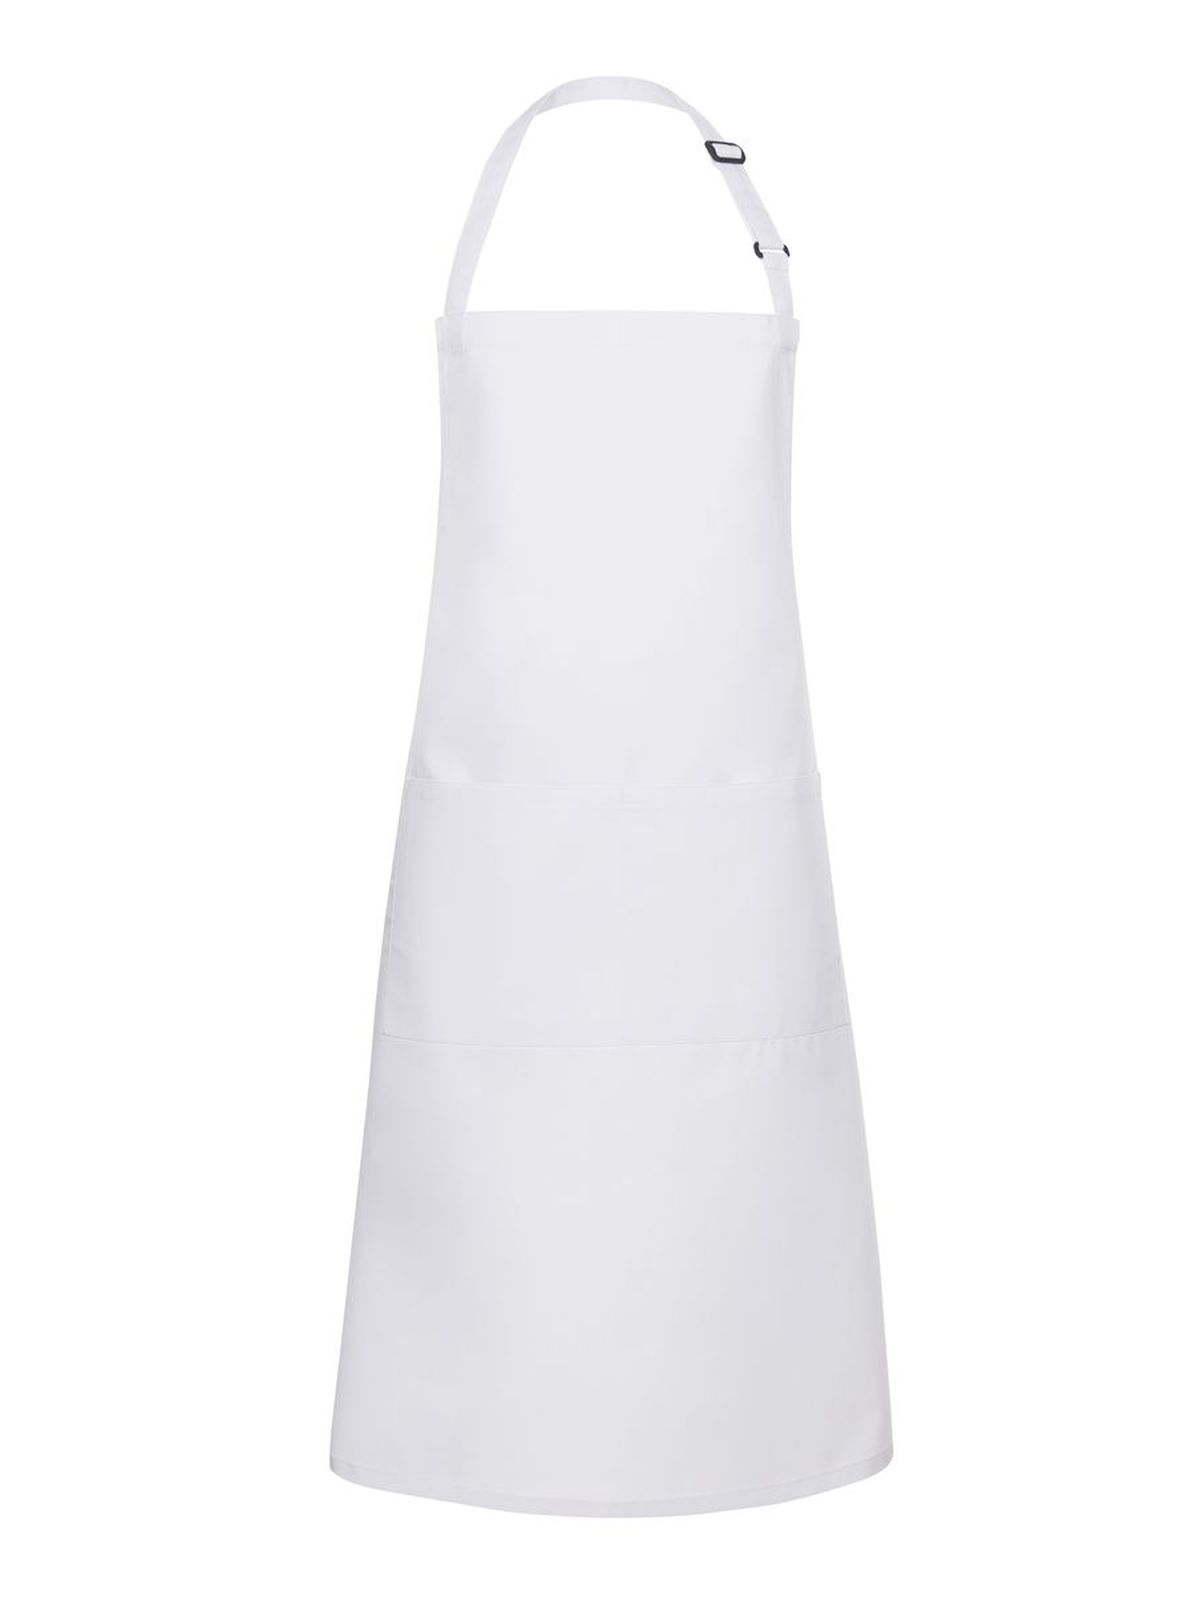 bistro-apron-basic-with-buckle-and-pocket-white.webp